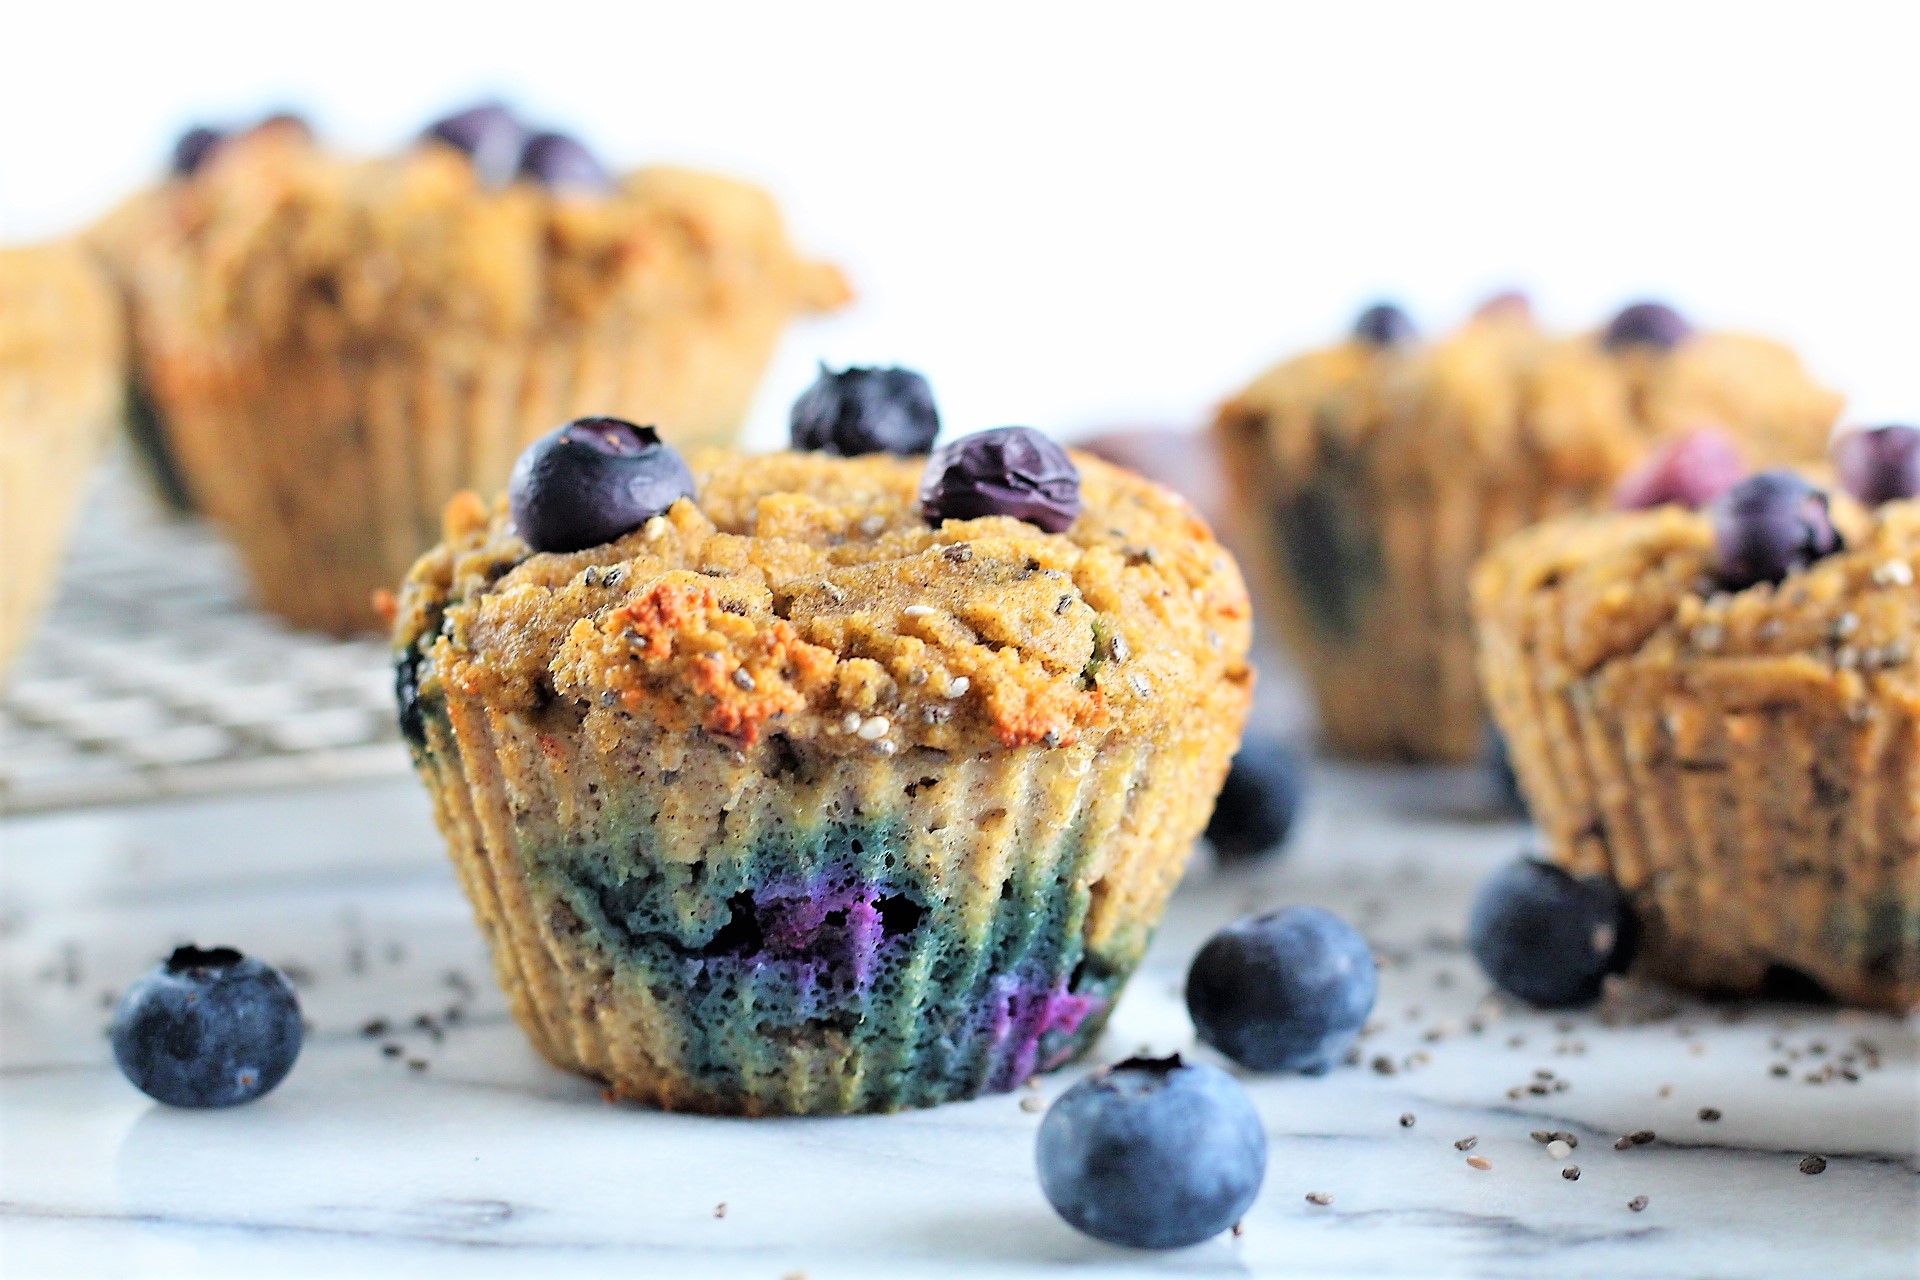   7. Blueberry Chia Muffins  (10 most popular recipes of 2018 